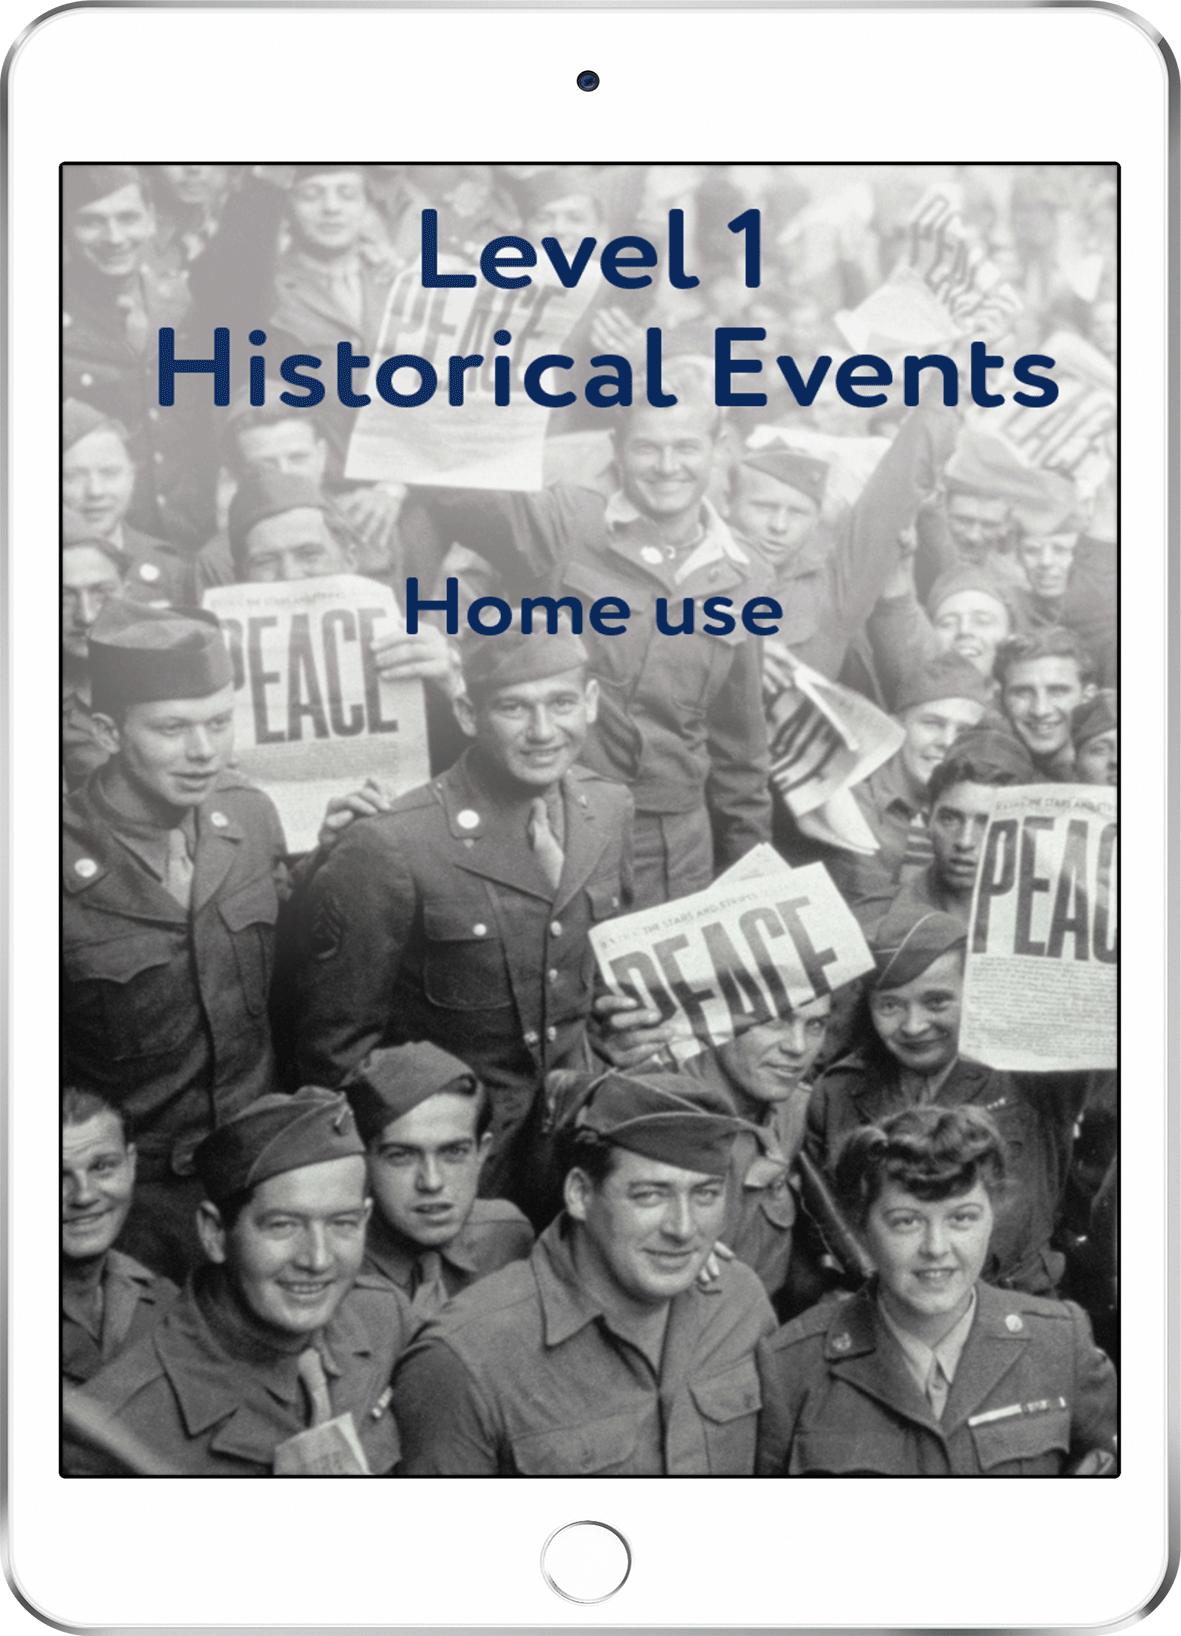 Level 1 Historical Events - Home Use